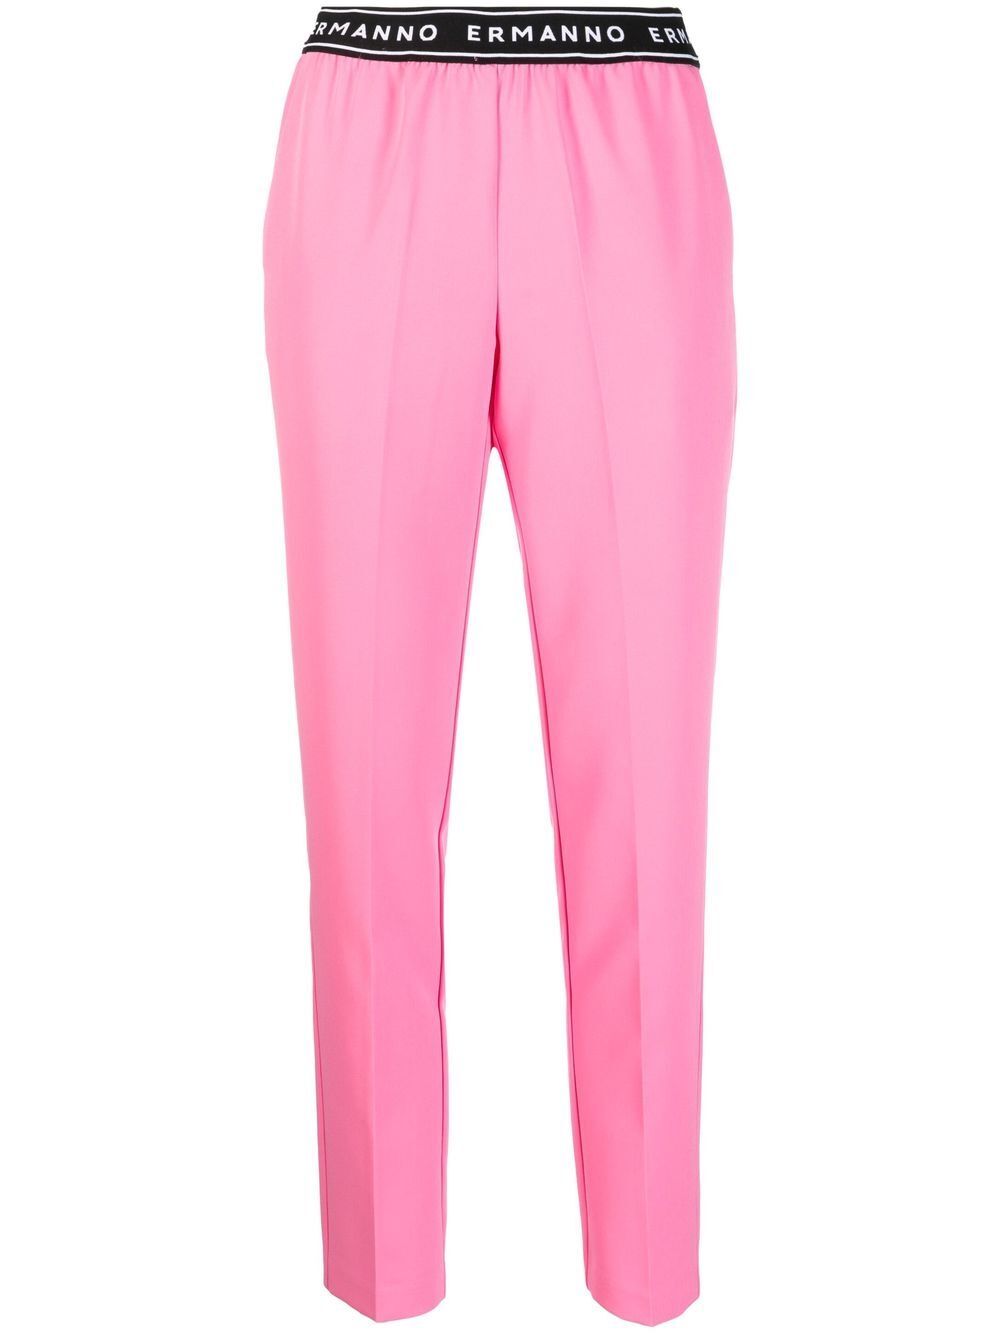 ERMANNO FIRENZE logo-waistband detail trousers - Pink